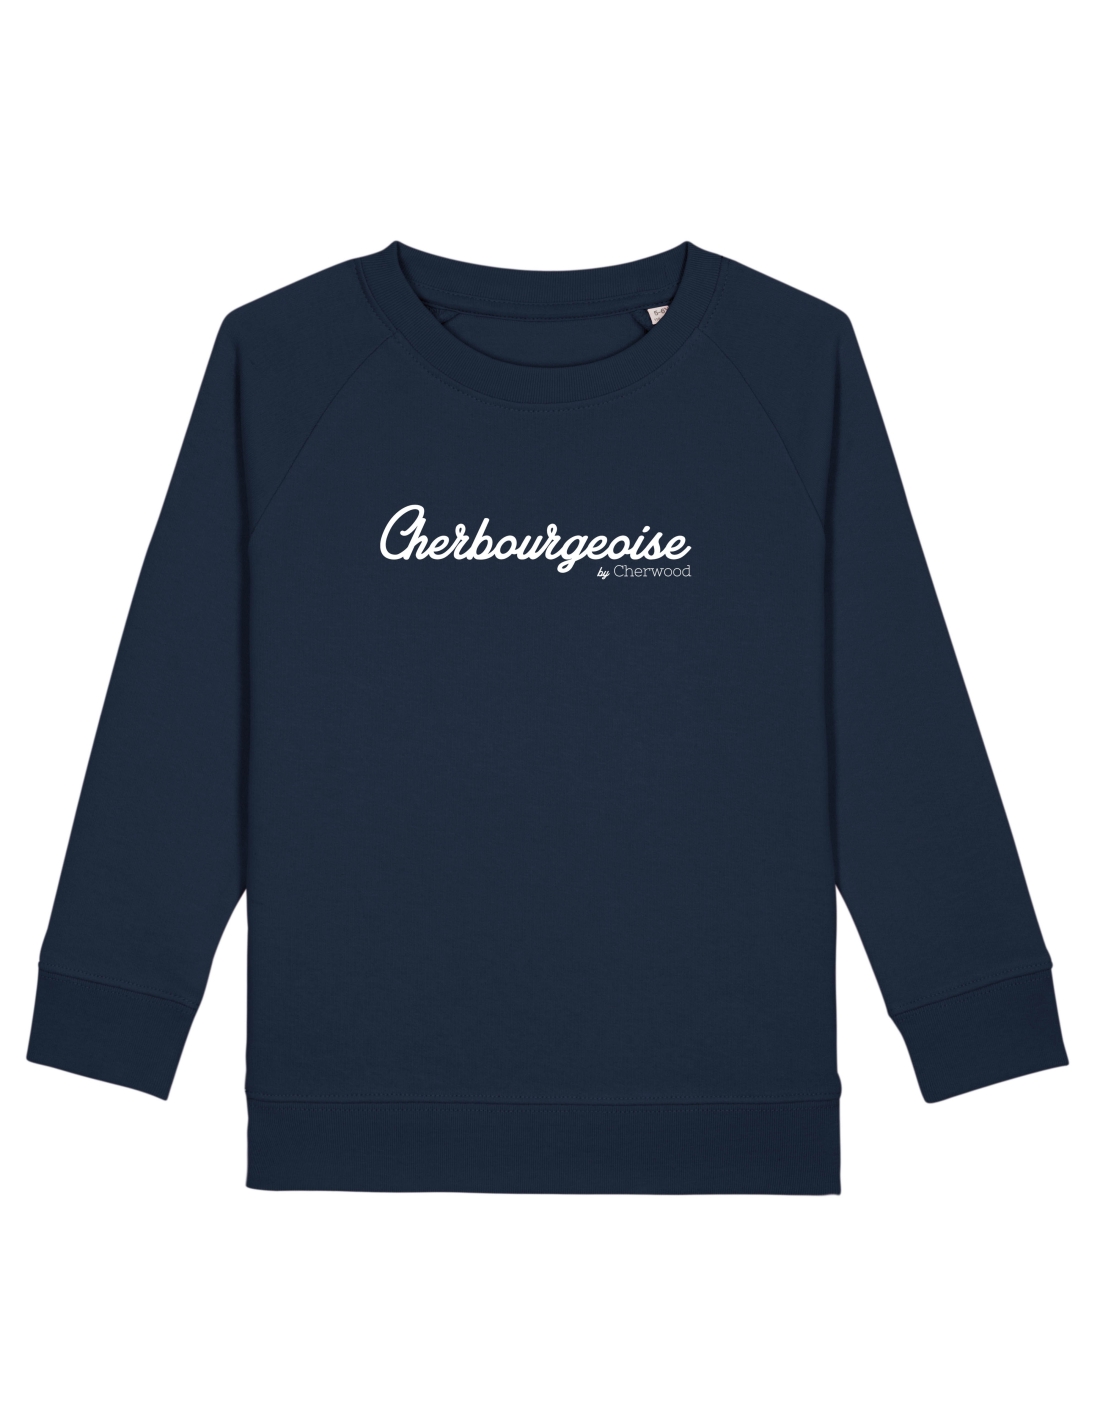 Sweat Fille Cherbourgeoise coton biologique by Cherwood